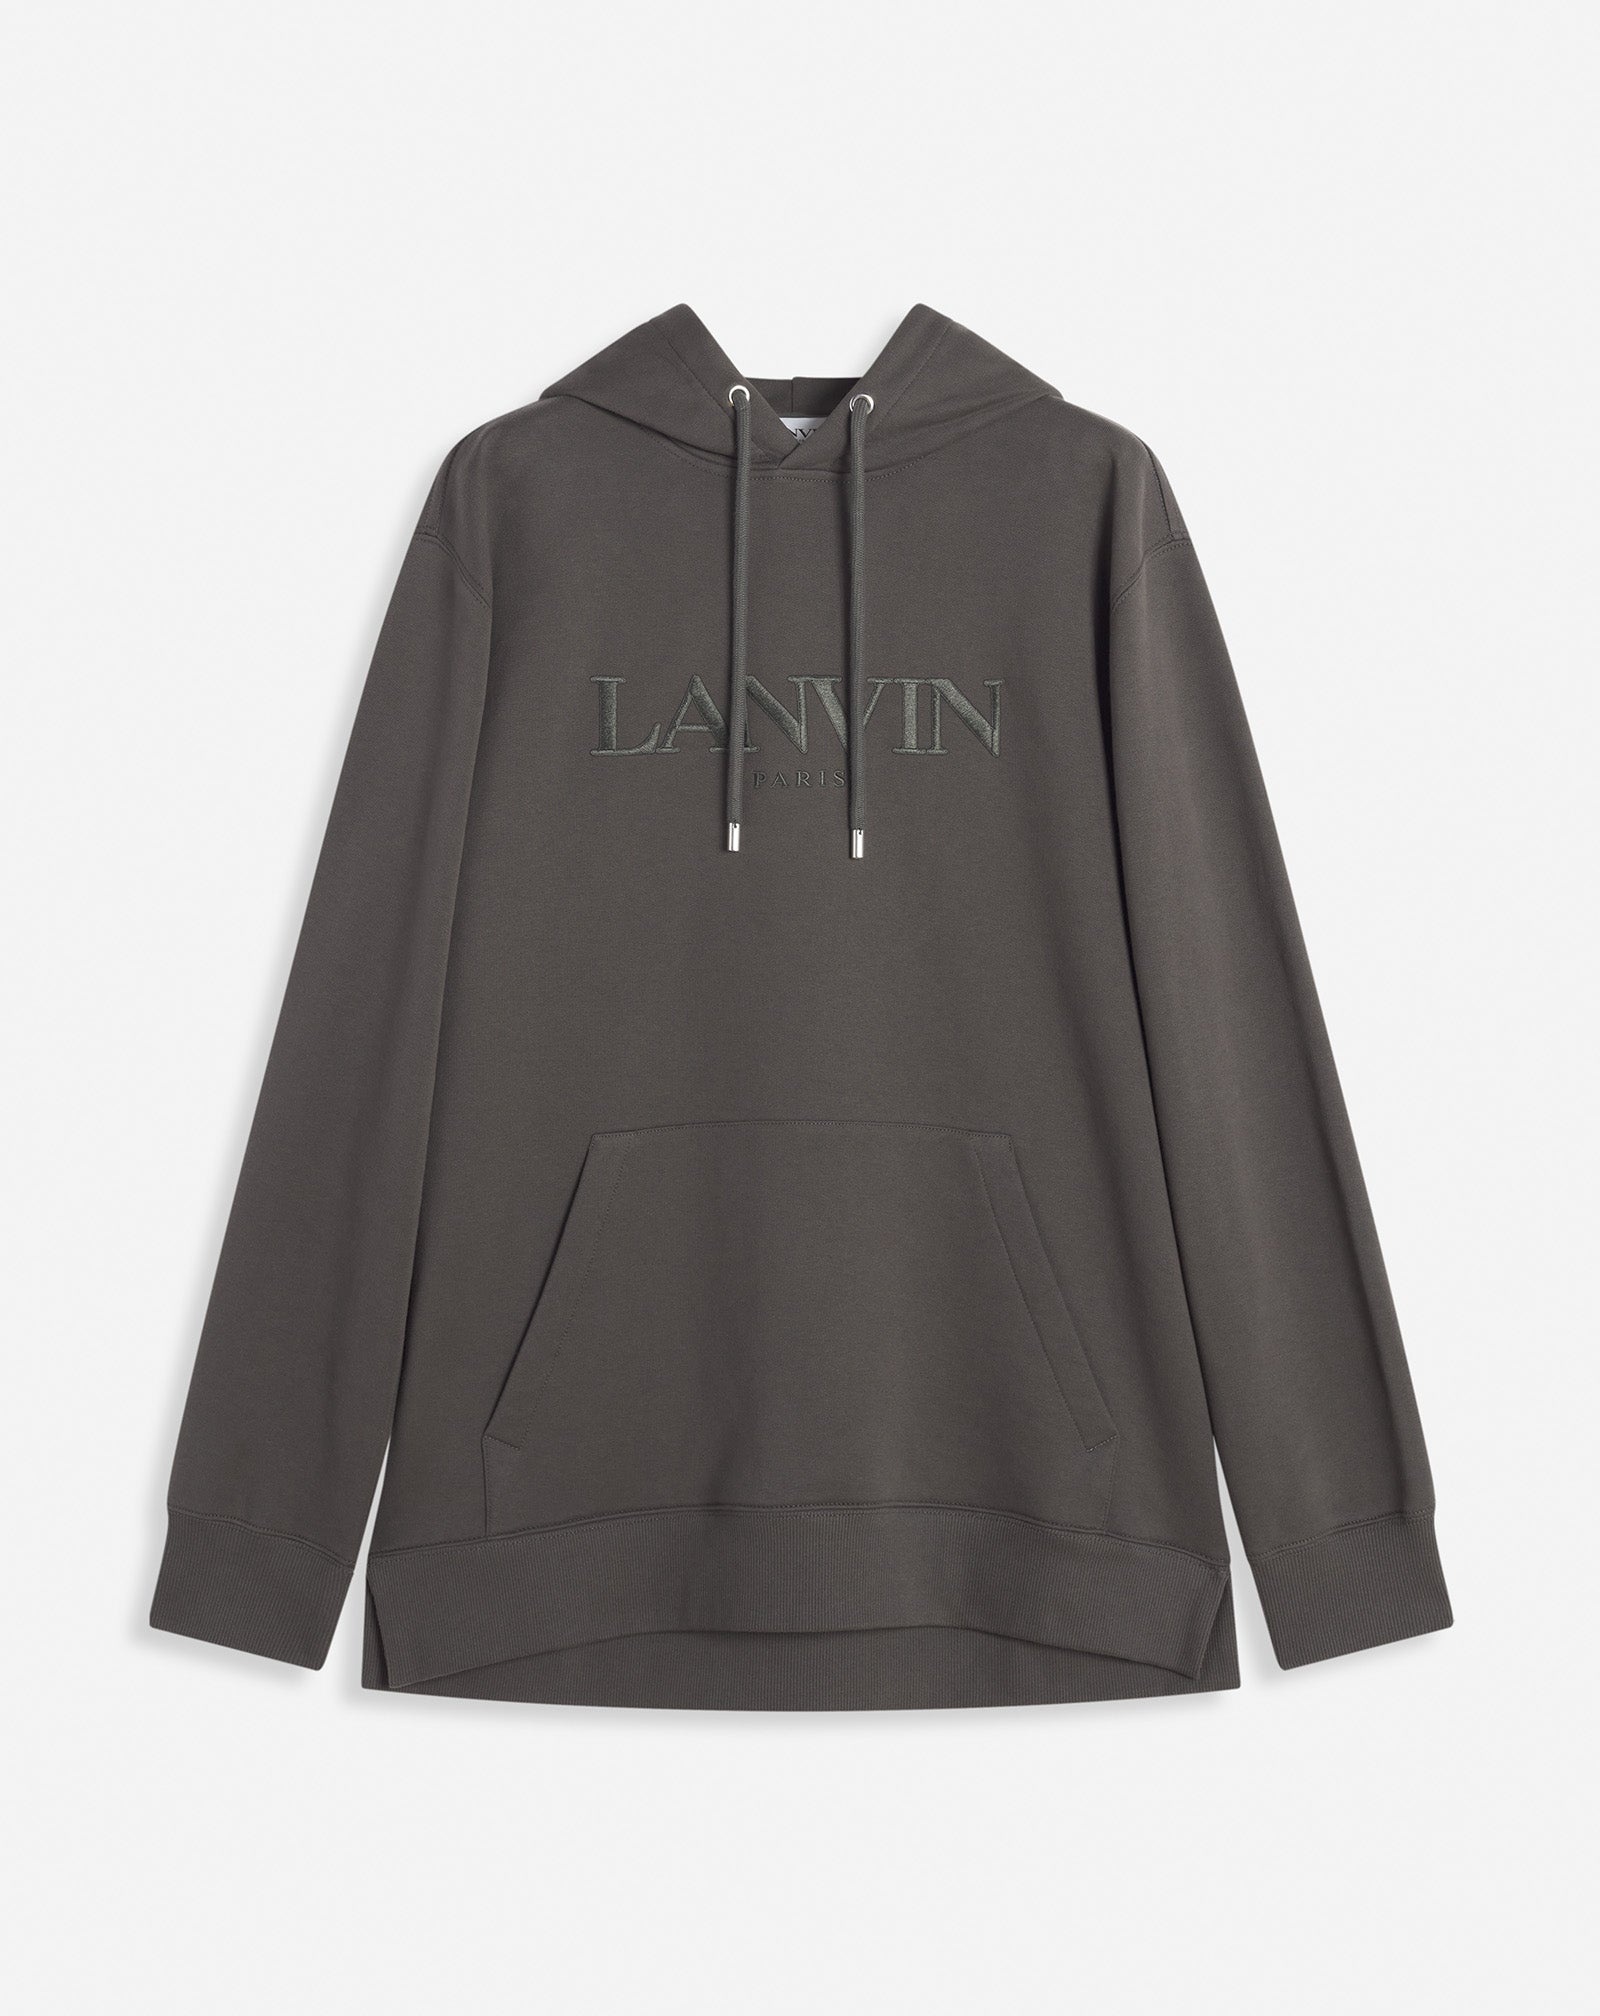 OVERSIZED LANVIN PARIS EMBROIDERED HOODIE - 1